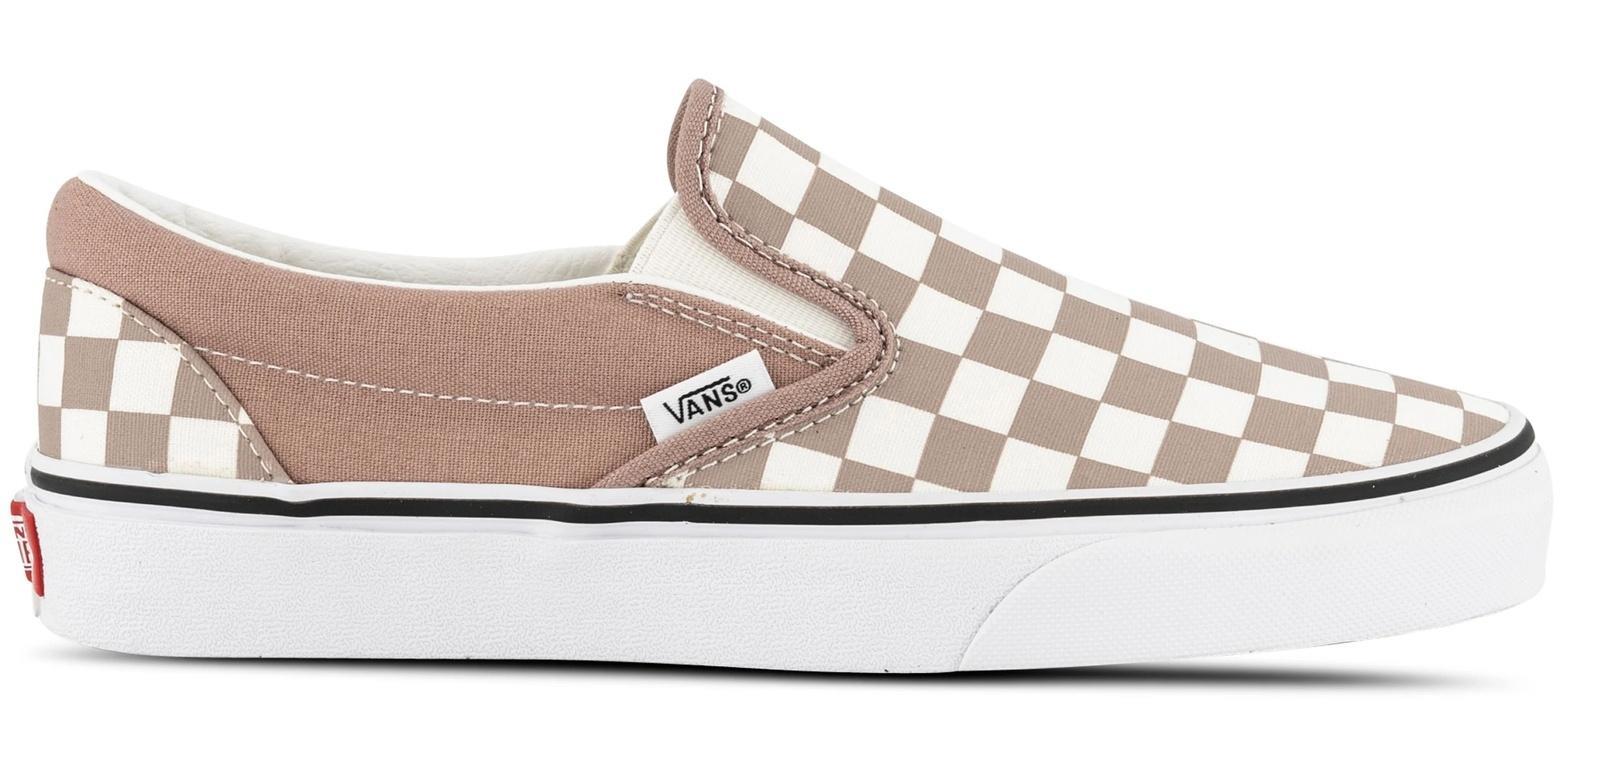 Vans Classic Slip On Canvas Sneaker Shoes Chess Check - Etherea/True White - US 6